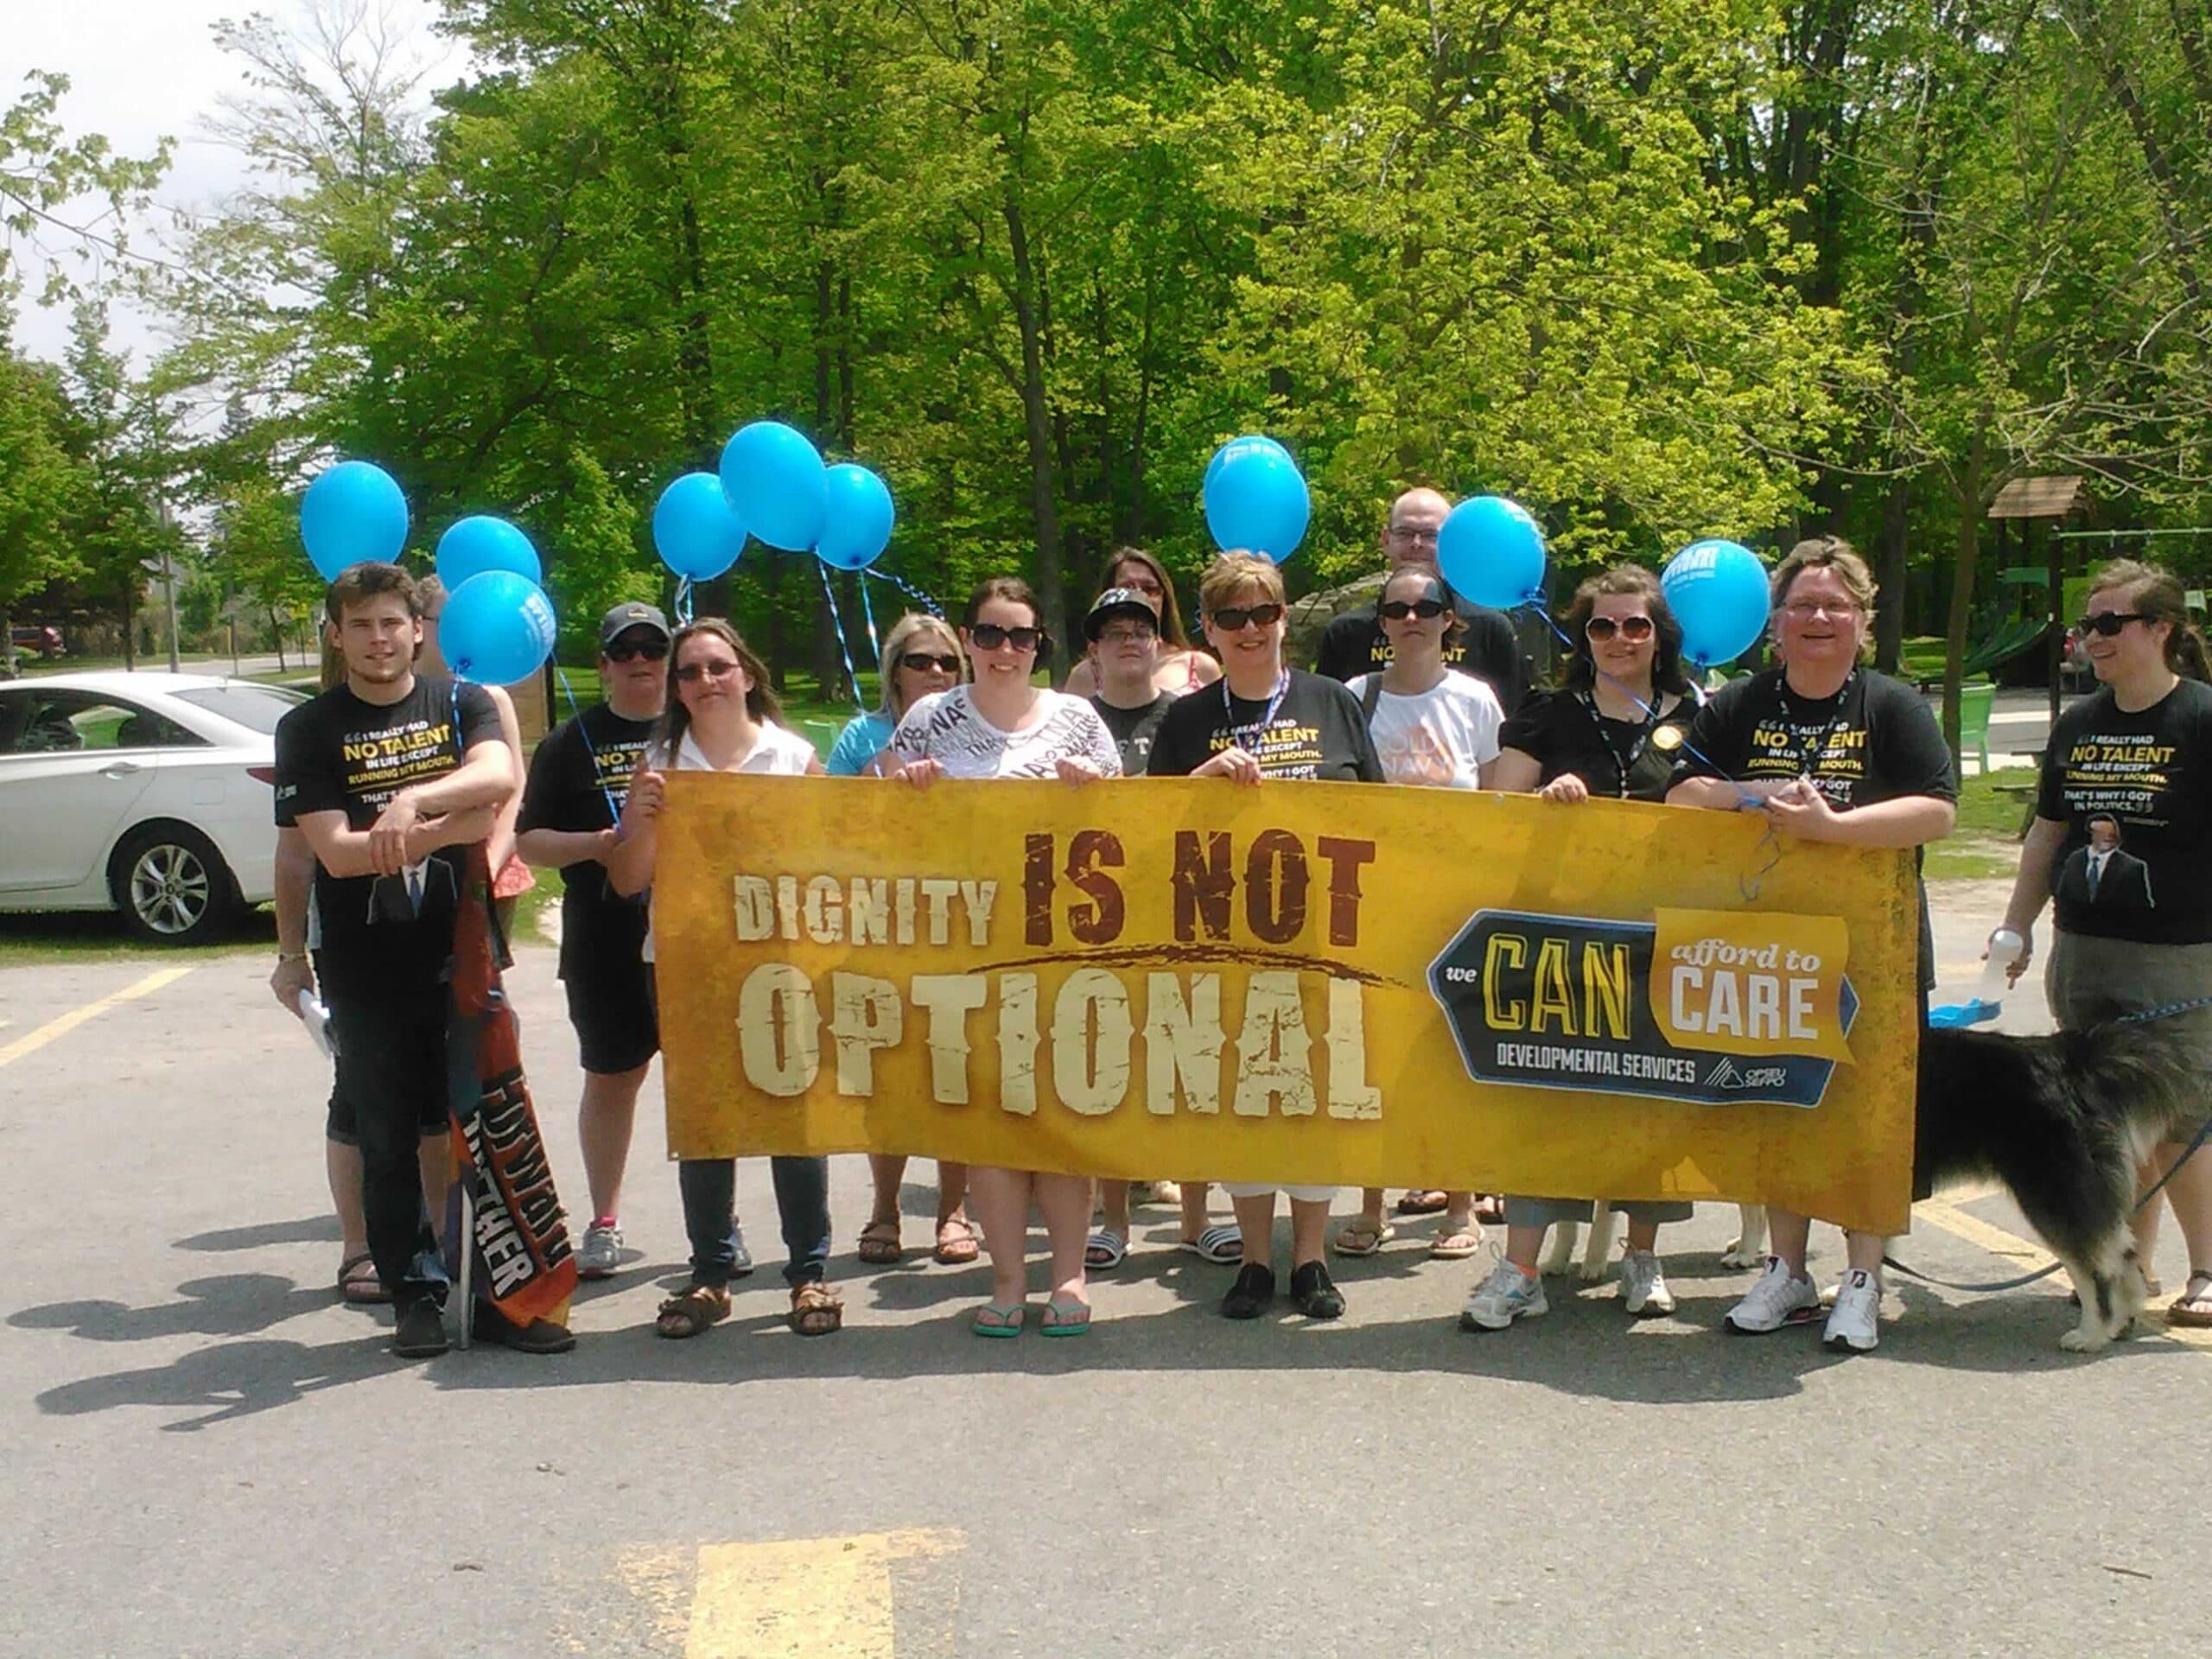 OPSEU members hold up balloons & banner that says: Dignity is not optional